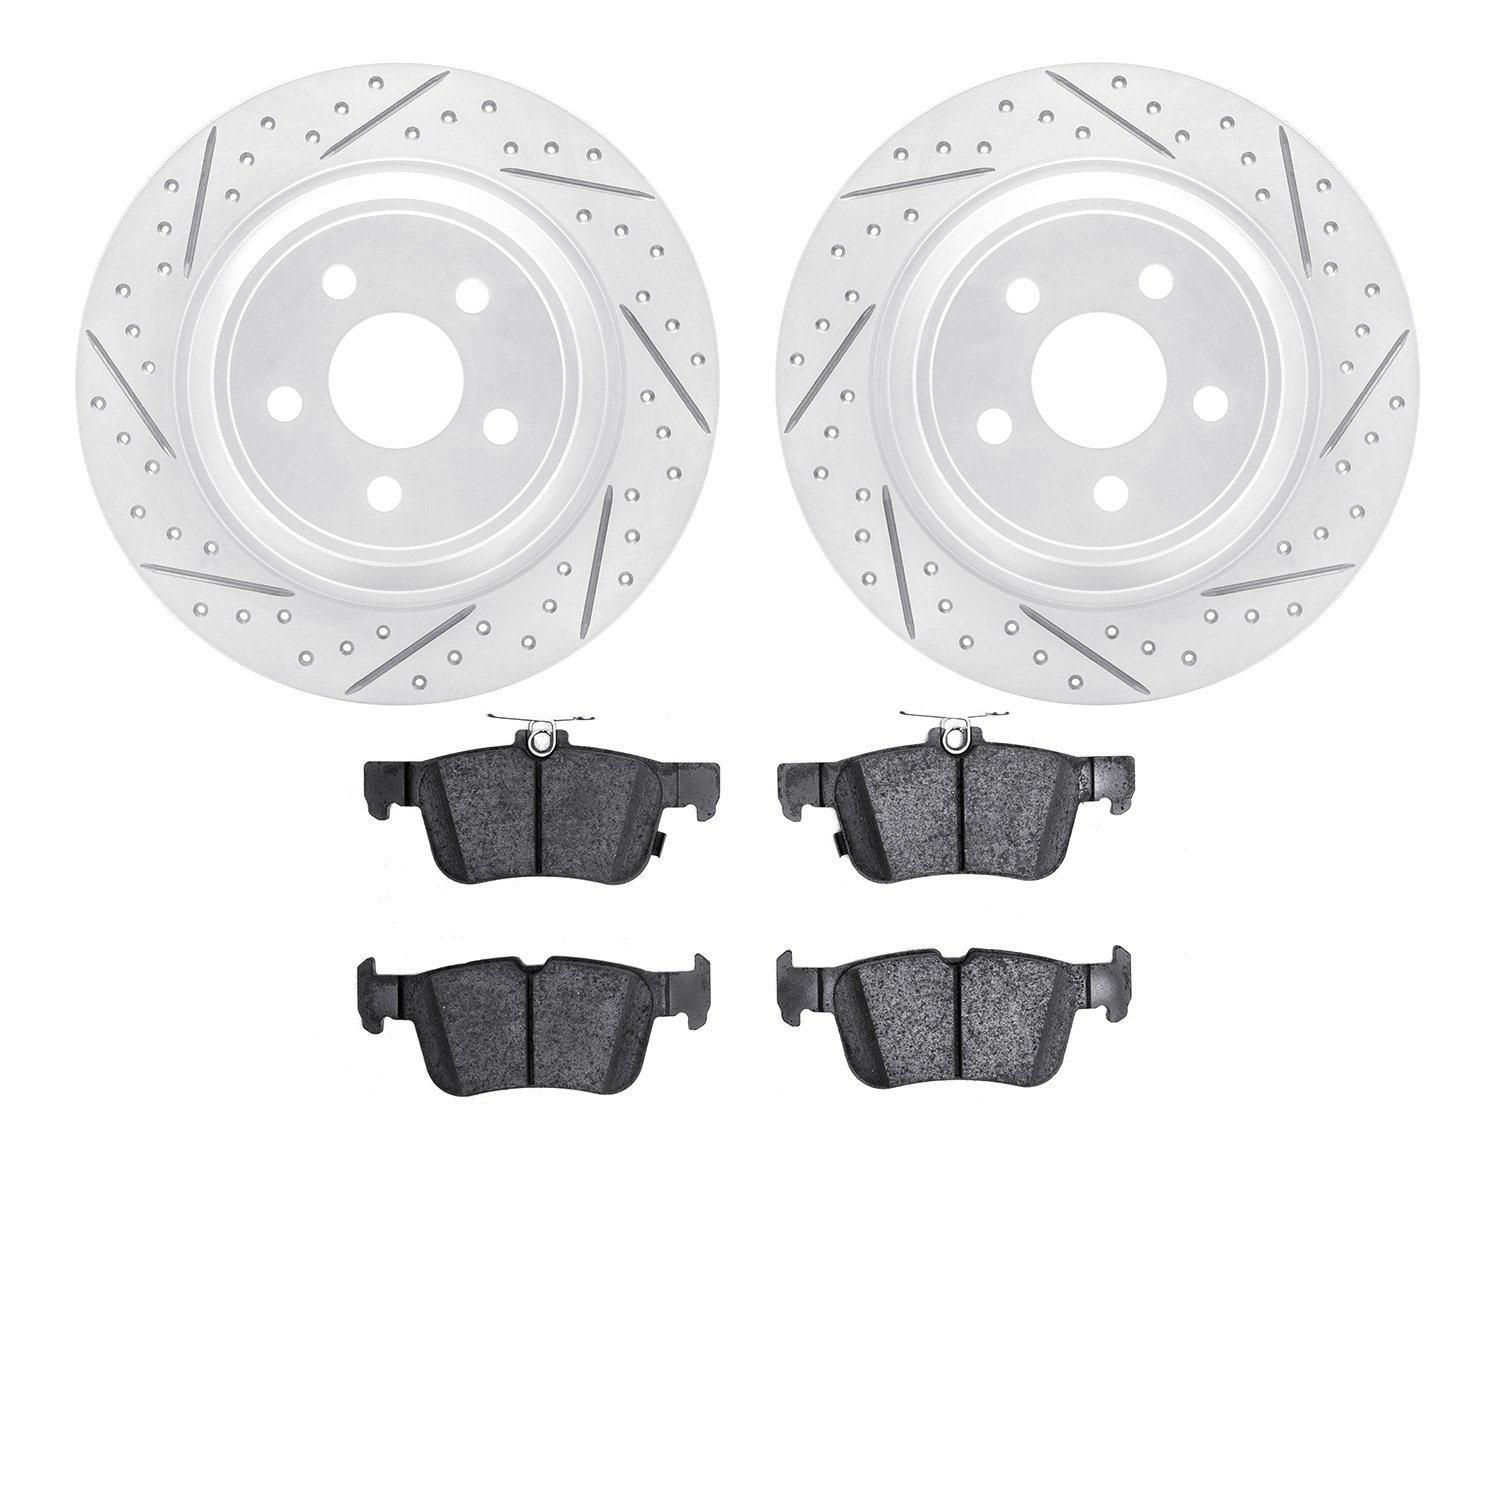 2502-55009 Geoperformance Drilled/Slotted Rotors w/5000 Advanced Brake Pads Kit, Fits Select Ford/Lincoln/Mercury/Mazda, Positio